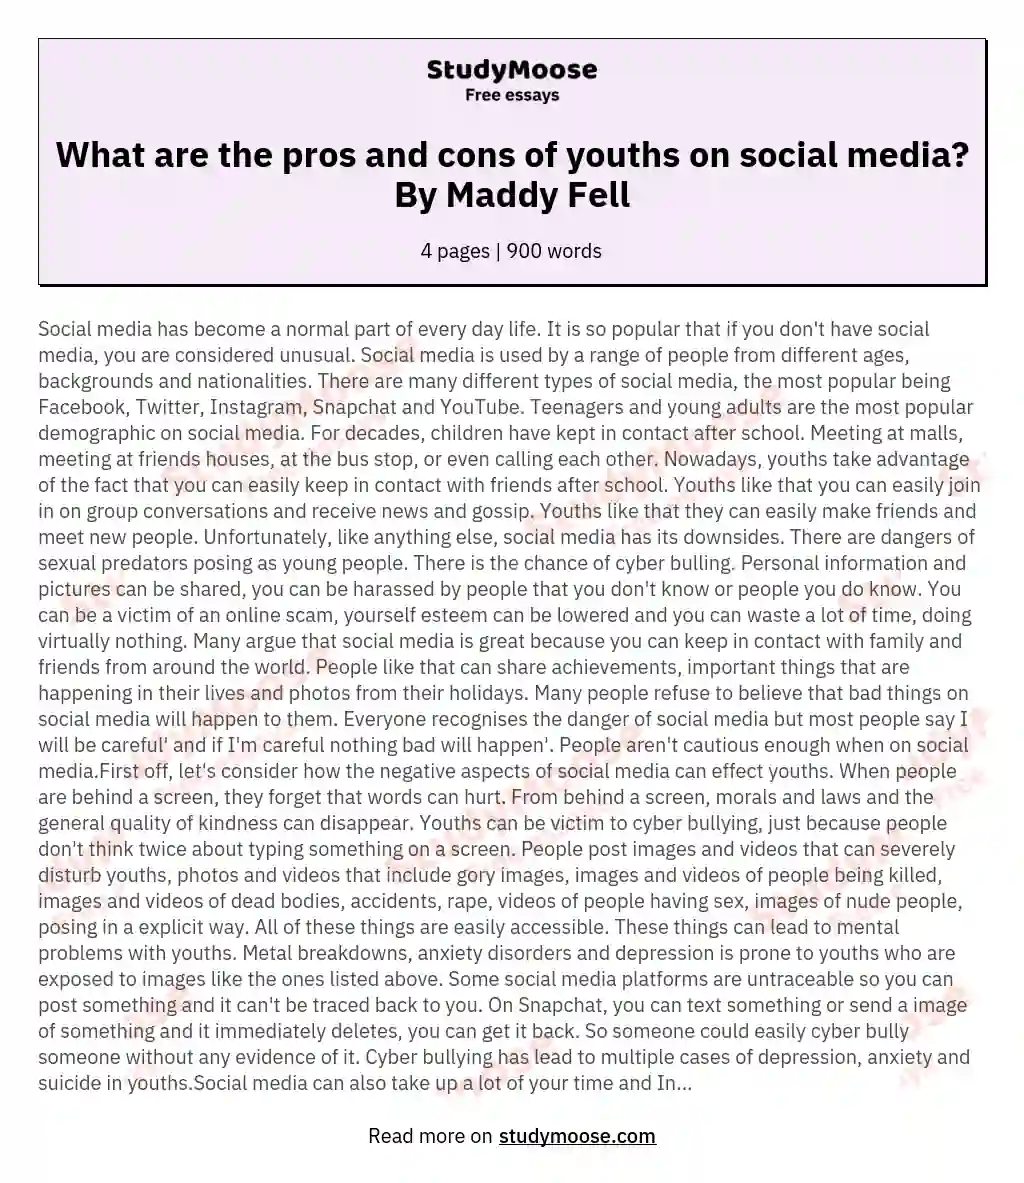 What are the pros and cons of youths on social media? By Maddy Fell